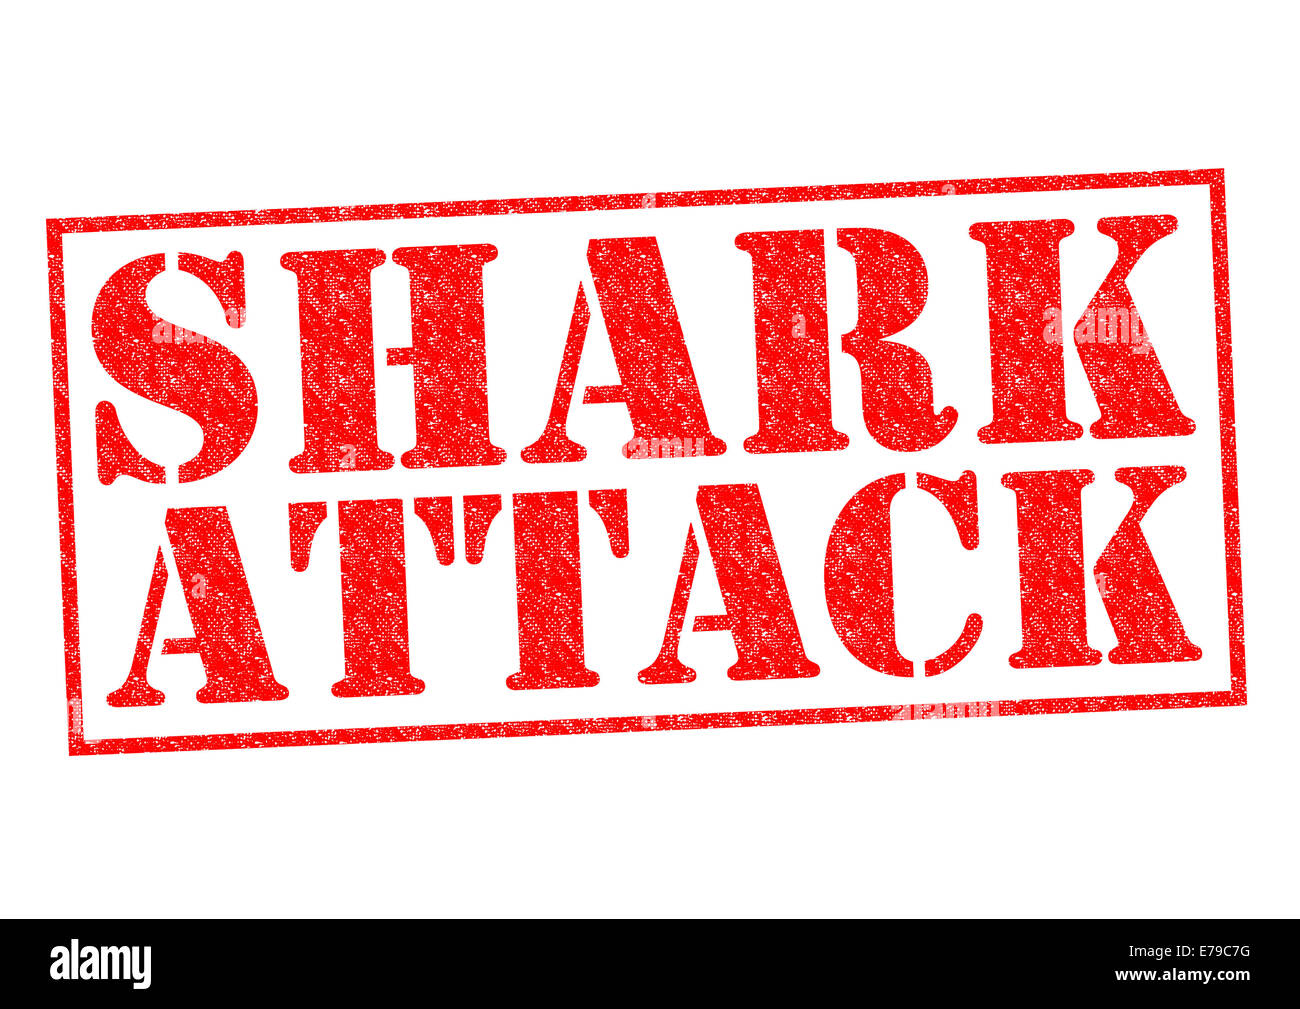 SHARK ATTACK red Rubber Stamp over a white background. Stock Photo